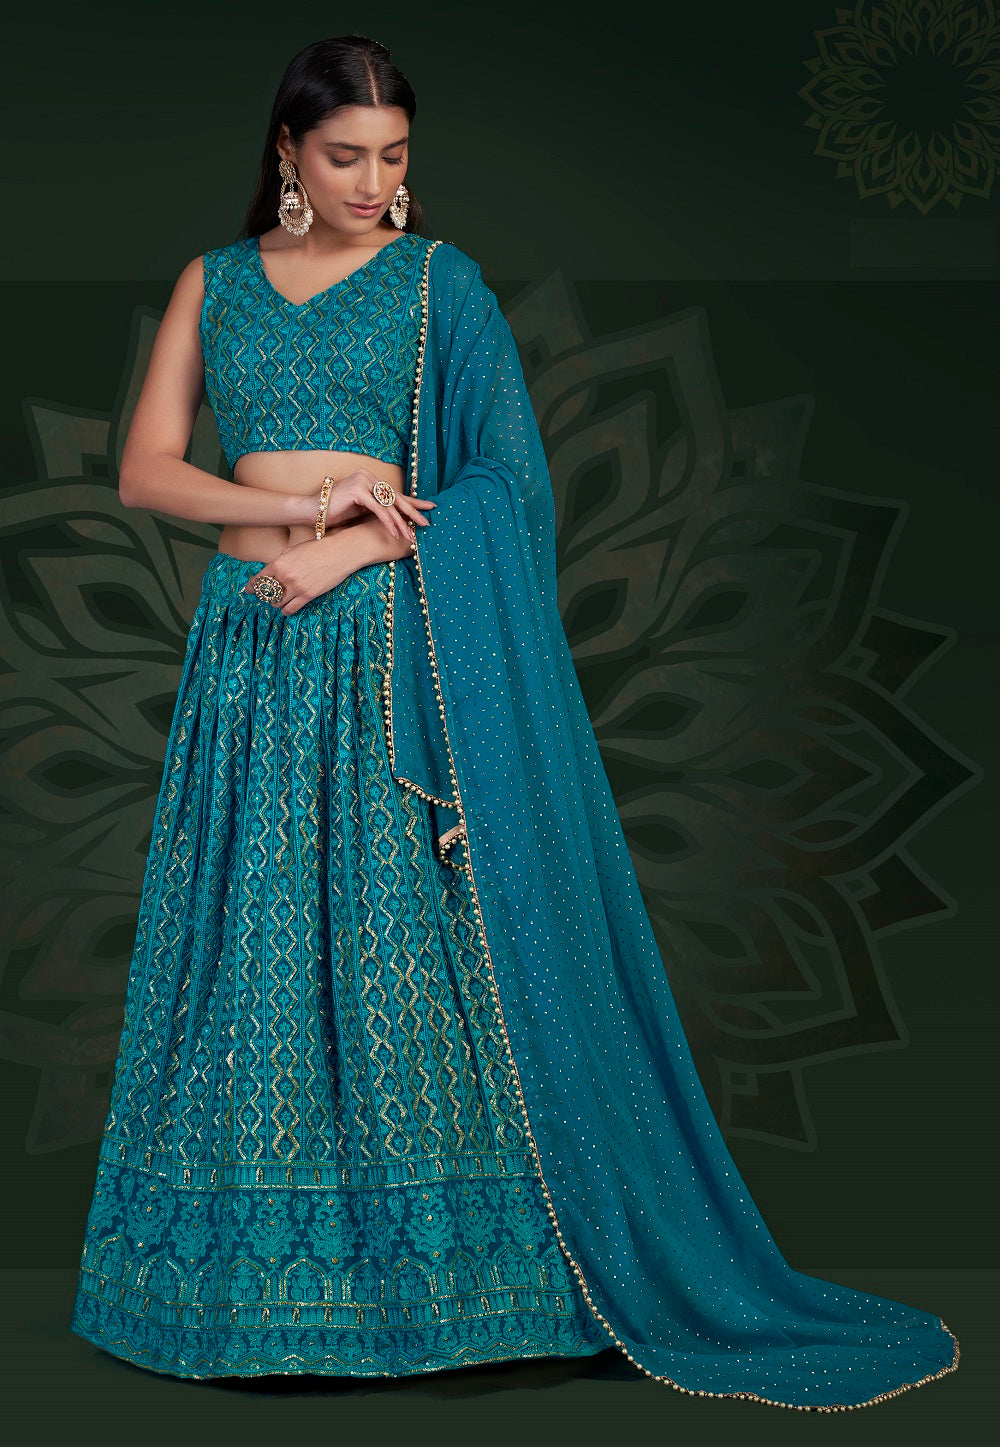 Georgette Embroidered Lehenga in Teal Blue